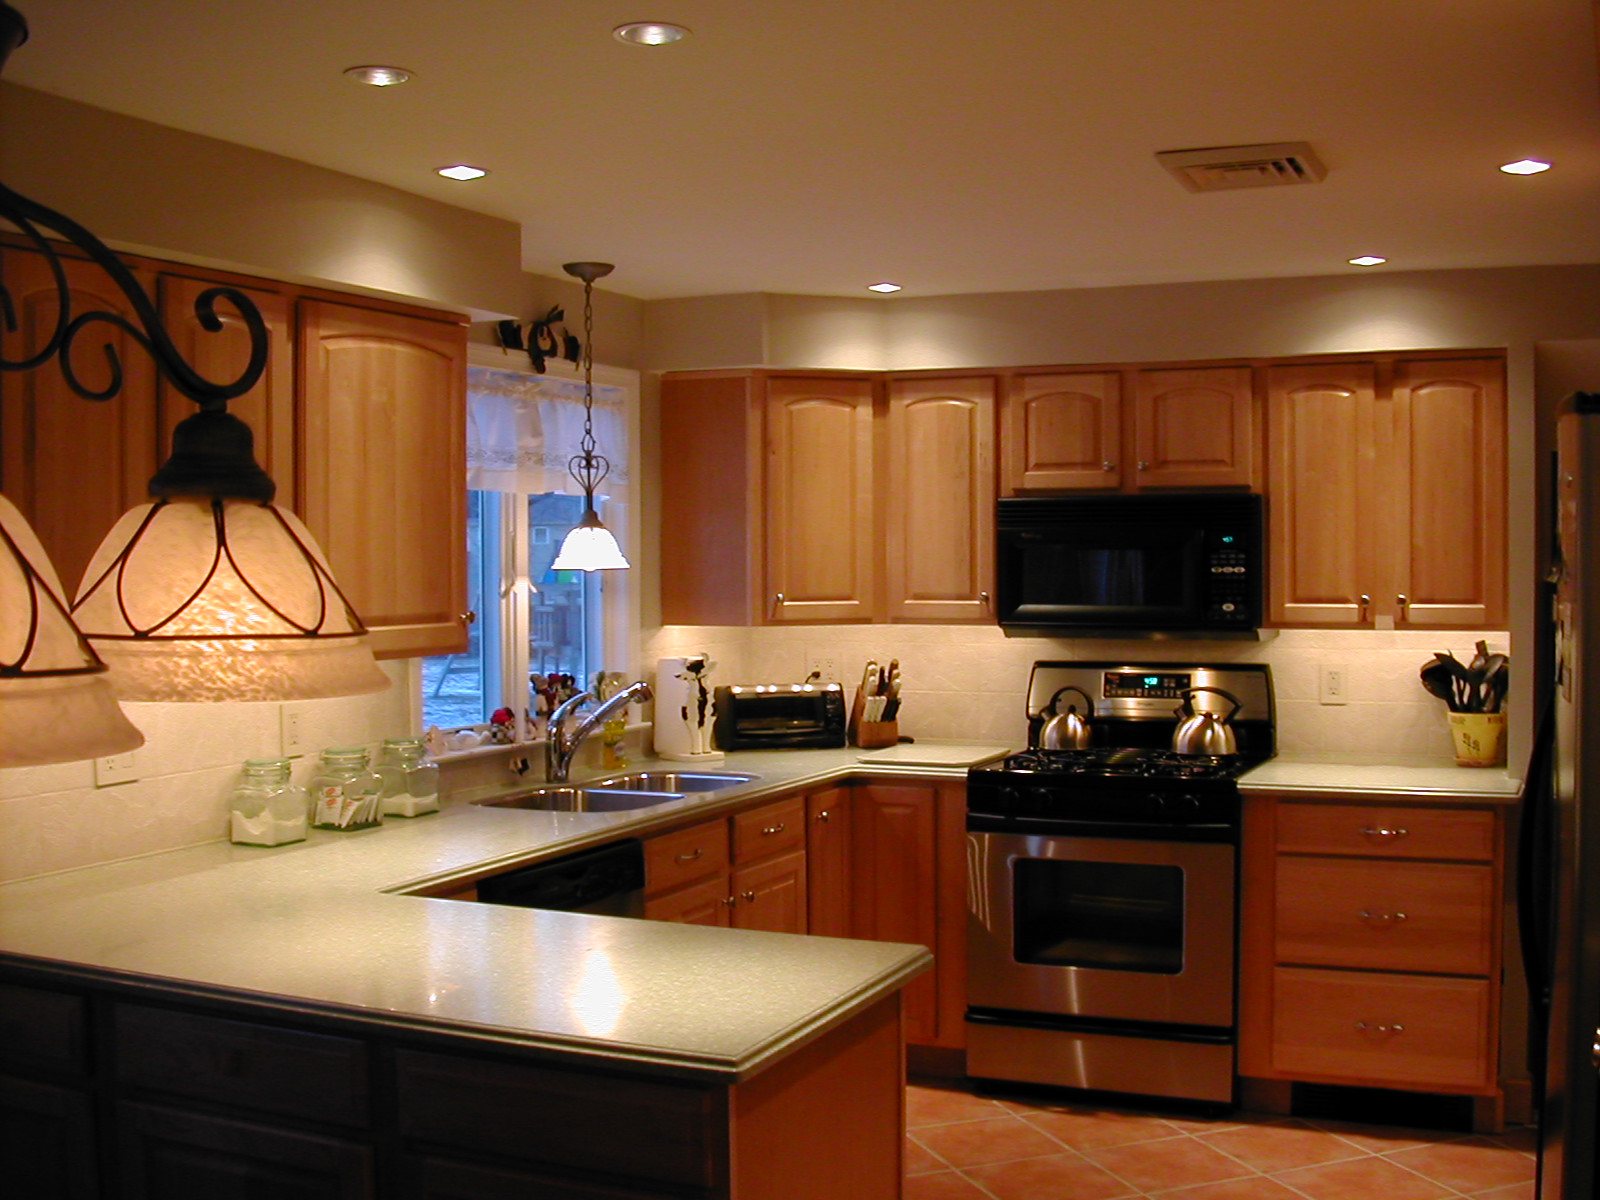 Luxurious Lowes Kitchen Design for Home Interior Makeover 